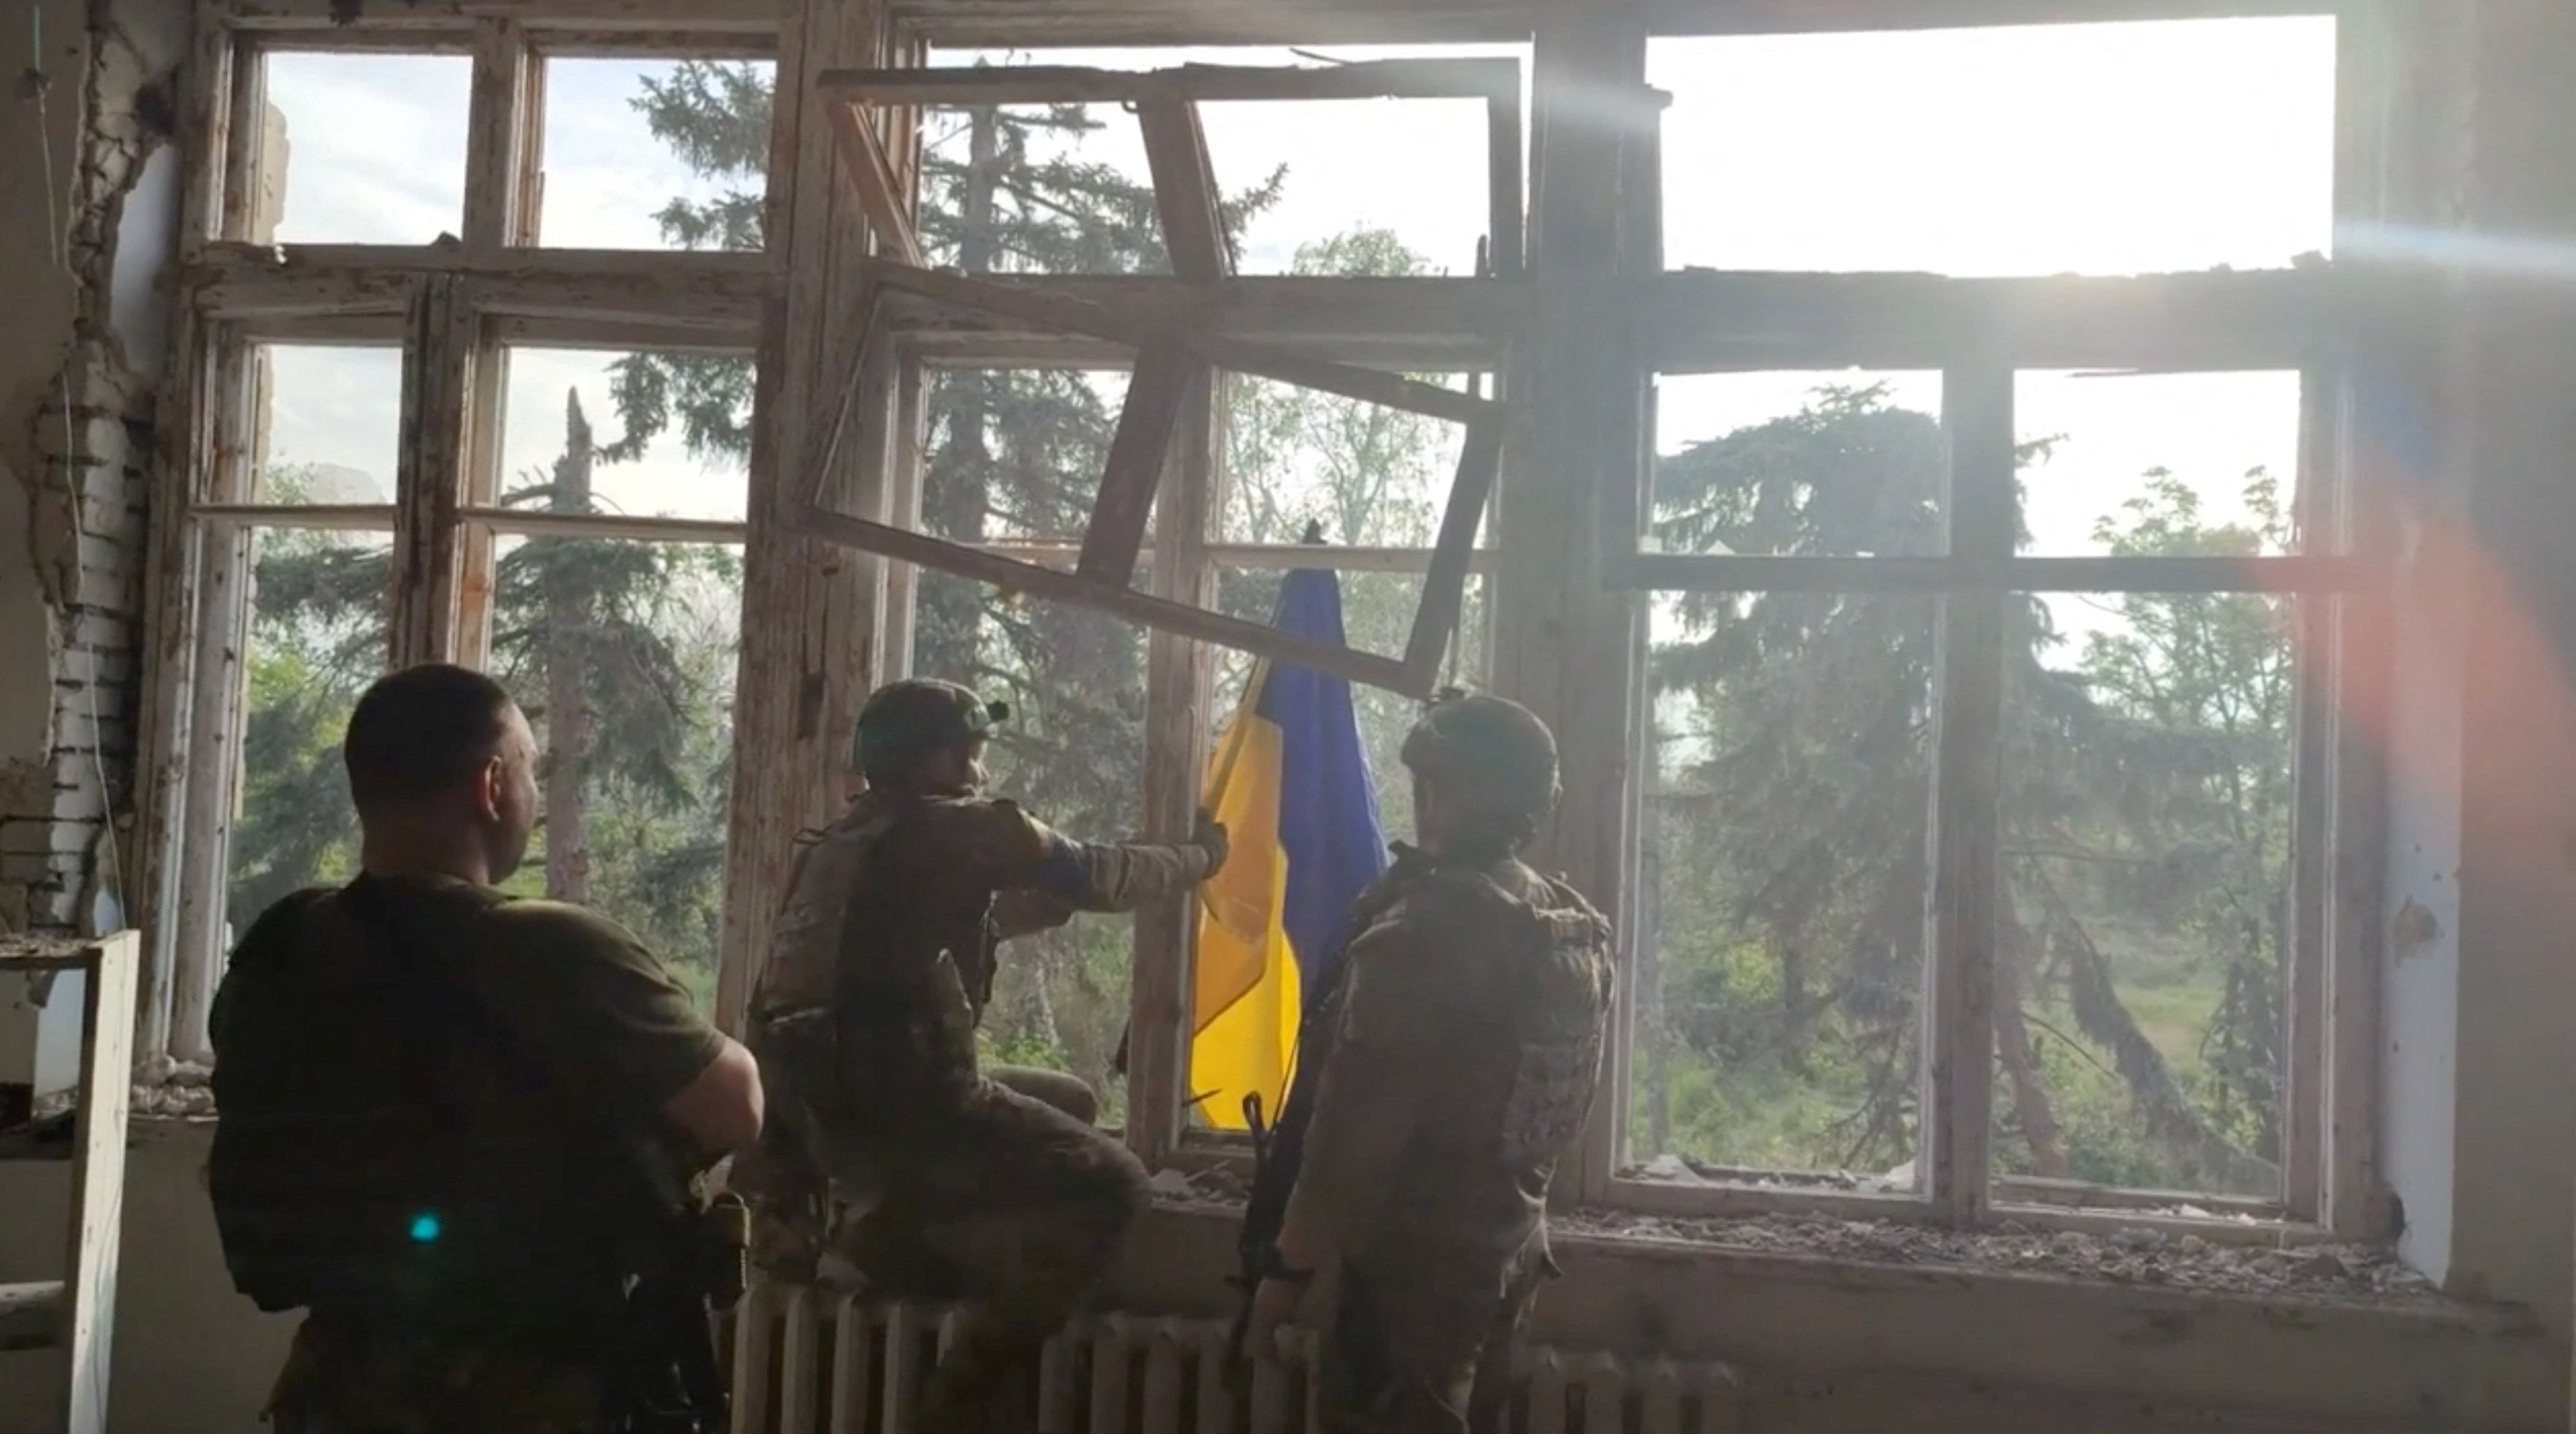  Ukrainian soldiers place a Ukrainian flag at a building, during an operation that claims to liberate the first village amid a counter-offensive